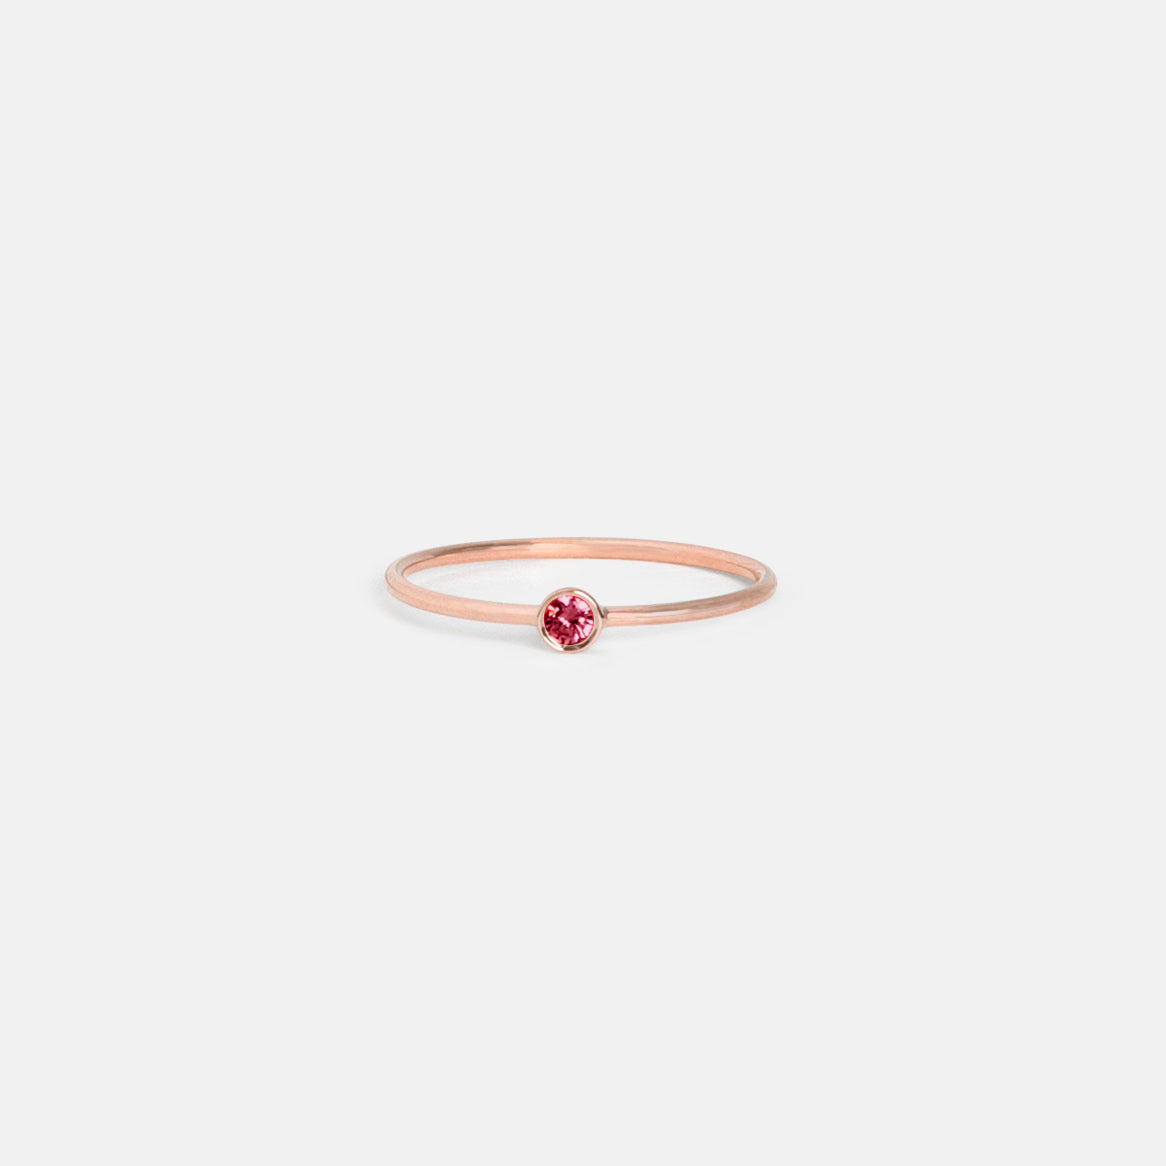 Large Kaya Ring in 14k Rose Gold set with Ruby by SHW Fine Jewelry